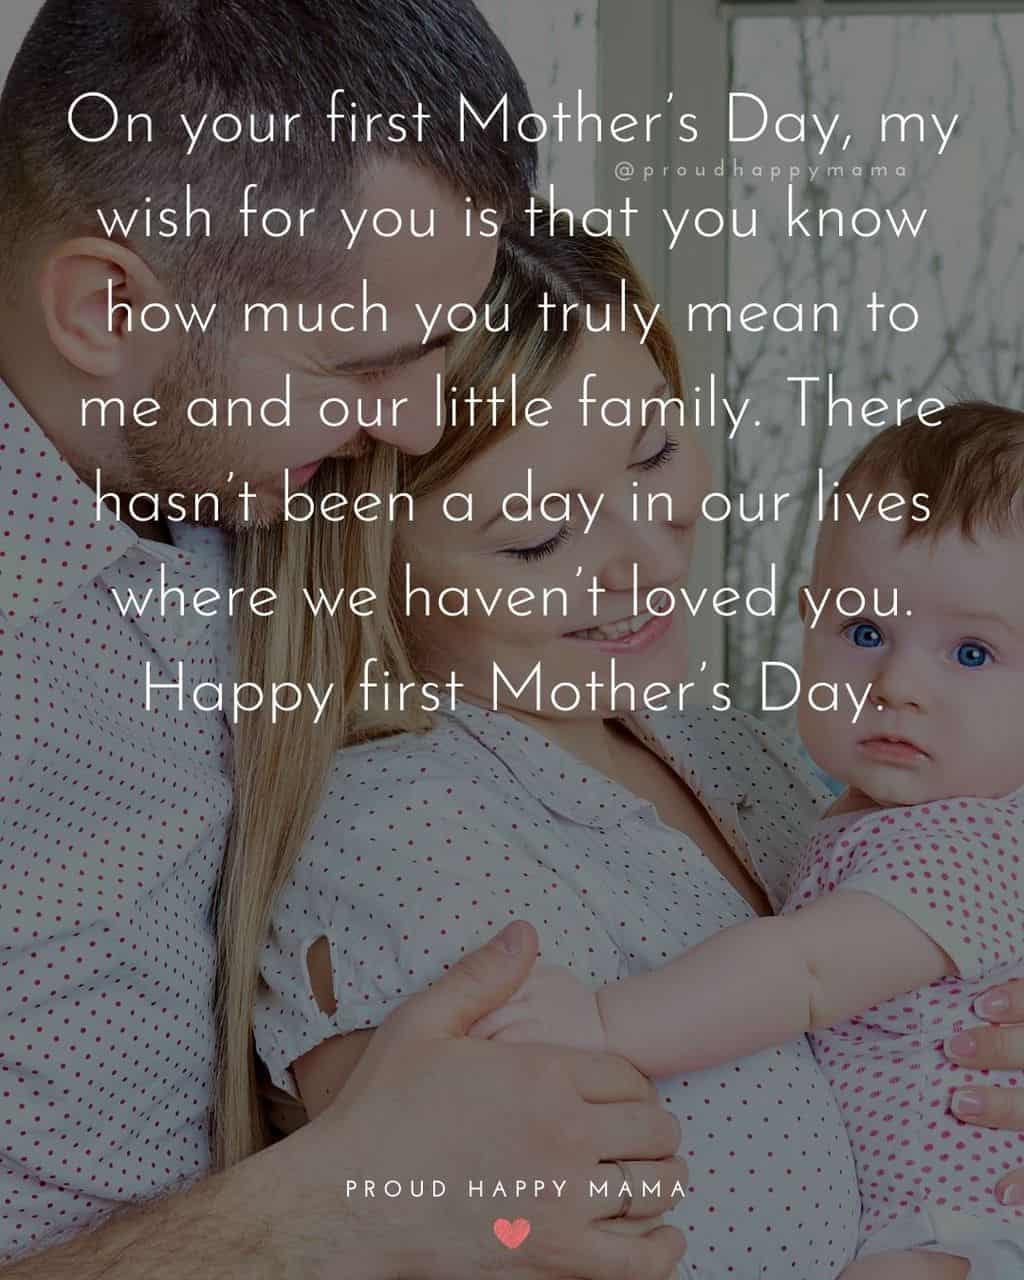 First Mothers Day Quotes - On your first Mother’s Day my wish for you is that you know how much you truly mean to me and our little family. 